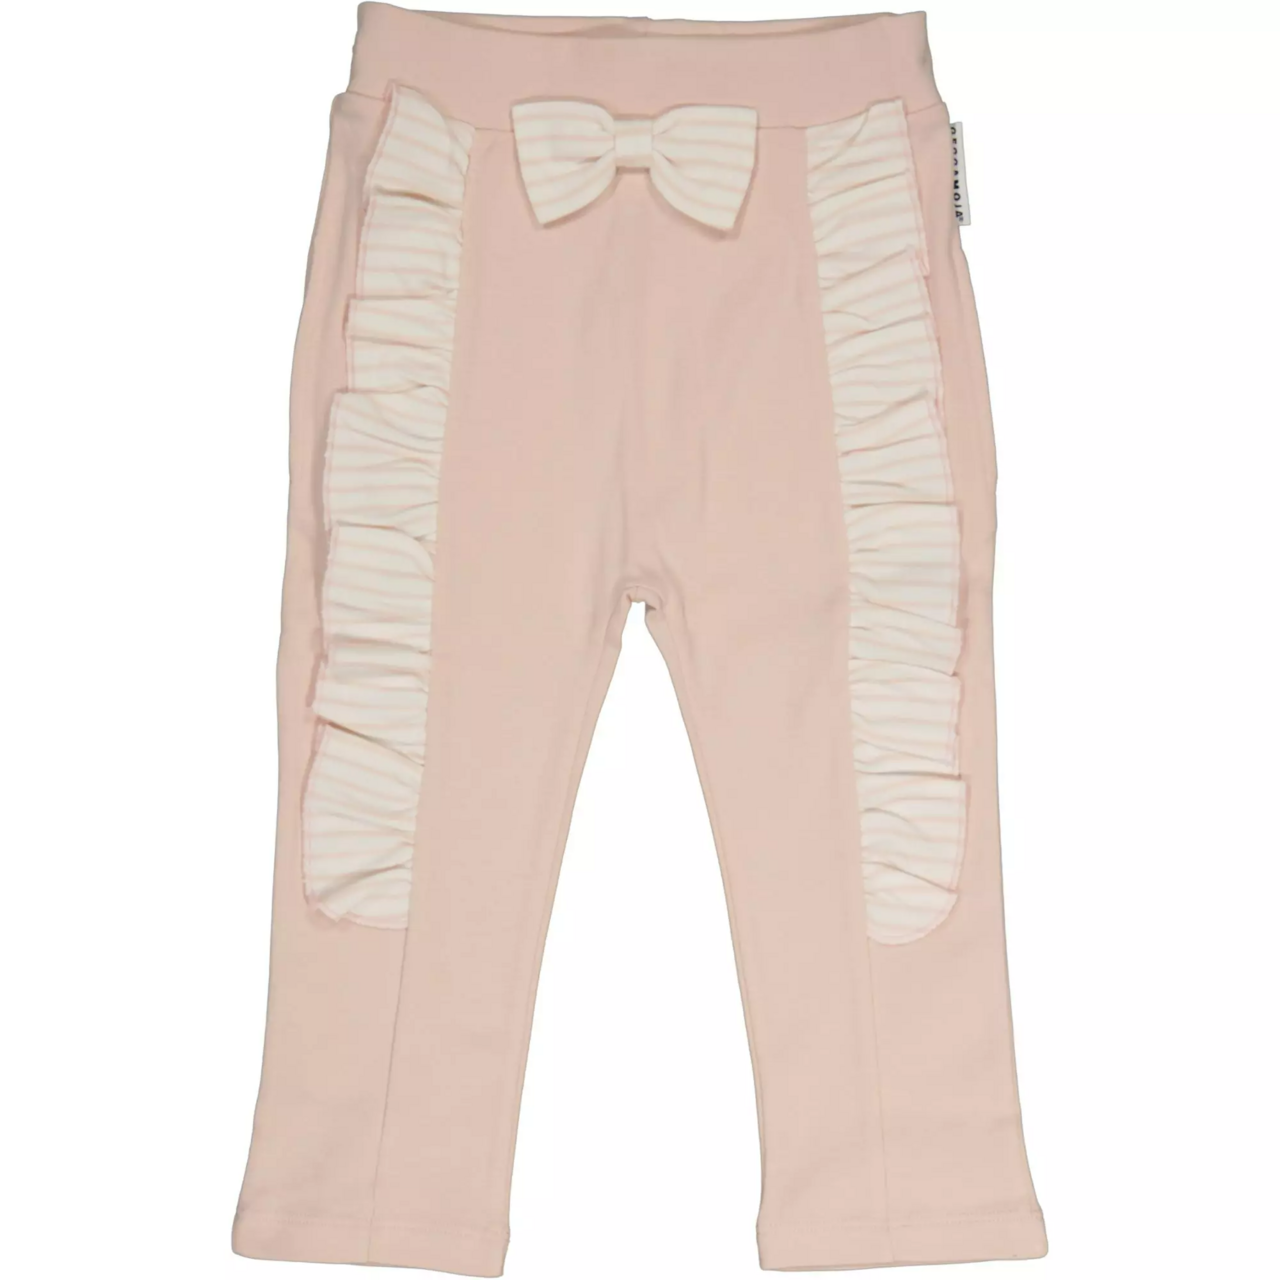 Flounce pant L.pink/offwhite